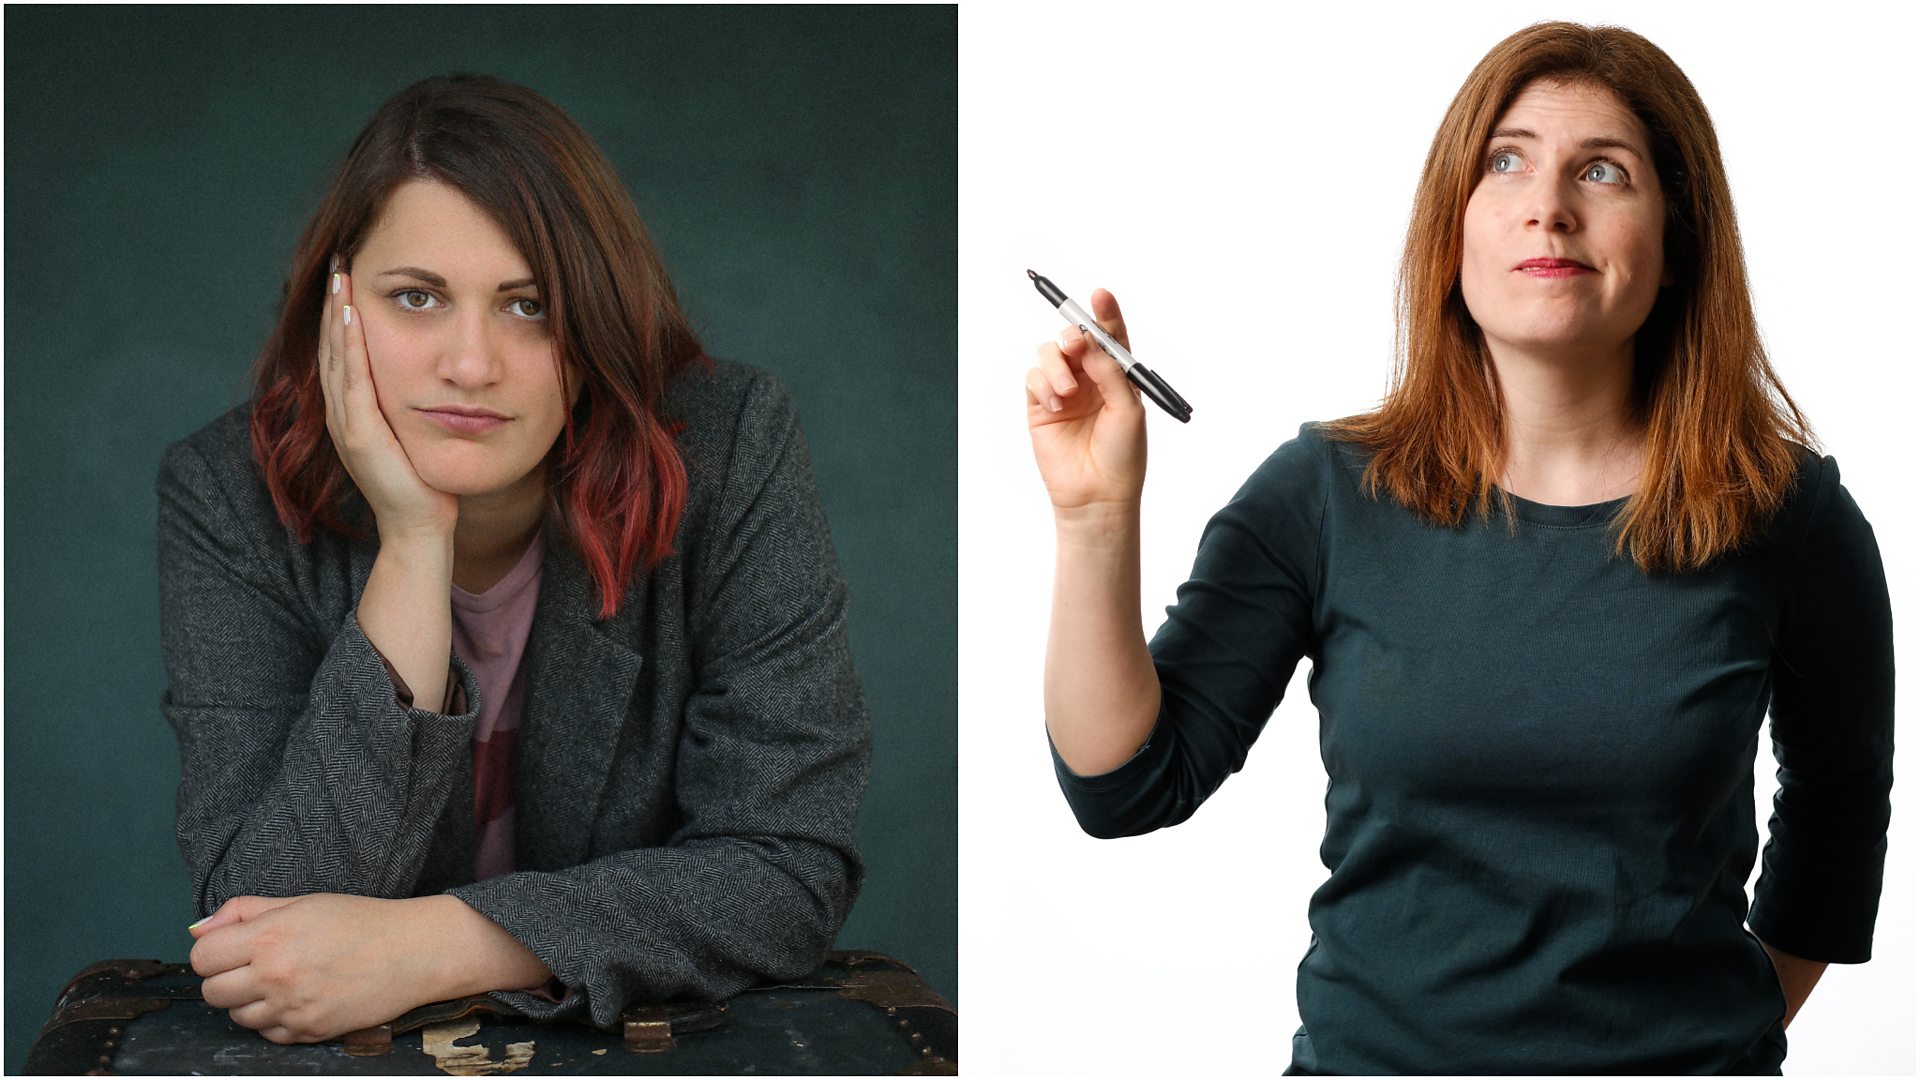 Writers Kate Herron and Briony Redman join forces for Doctor Who